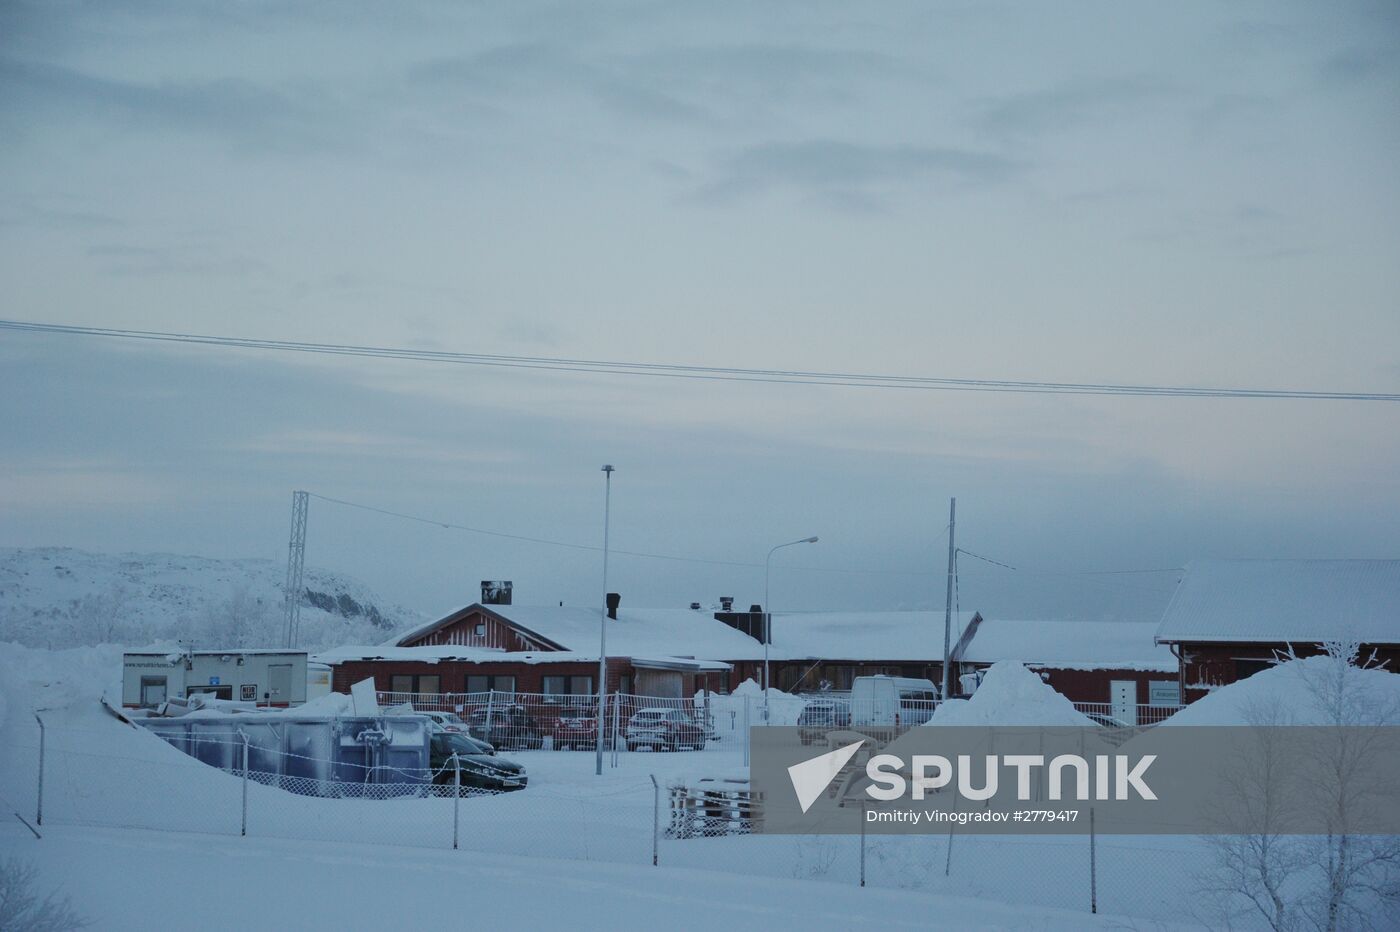 A refugee camp near Kirkenes, northern Norway